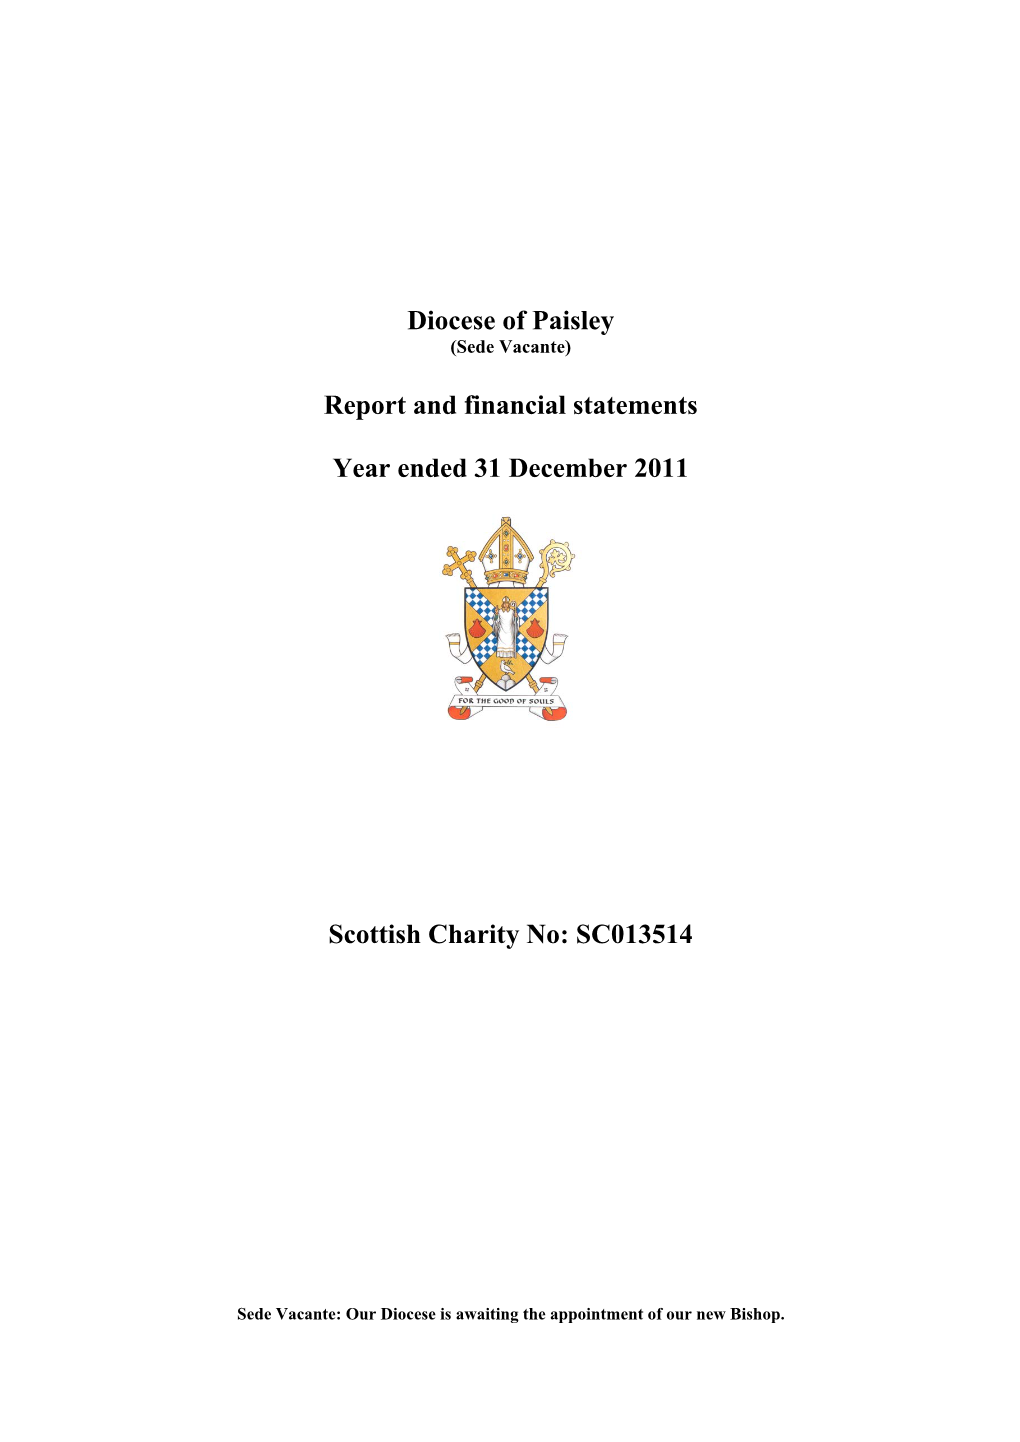 Diocese of Paisley Report and Financial Statements Year Ended 31 December 2011 Scottish Charity No: SC013514